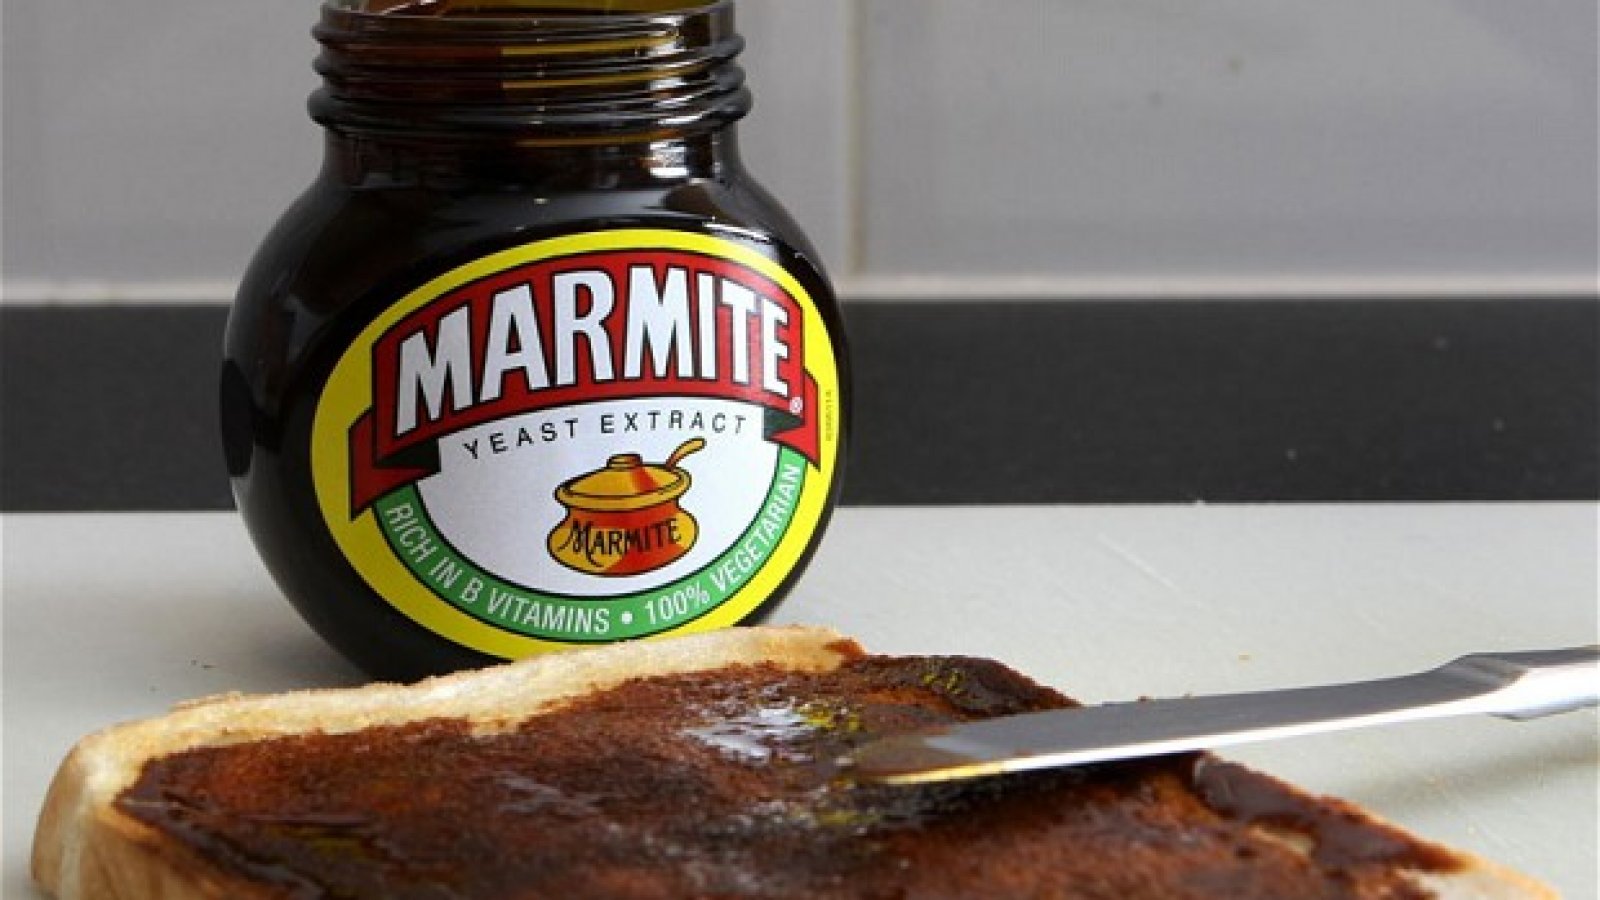 Marmite. Don't forget it